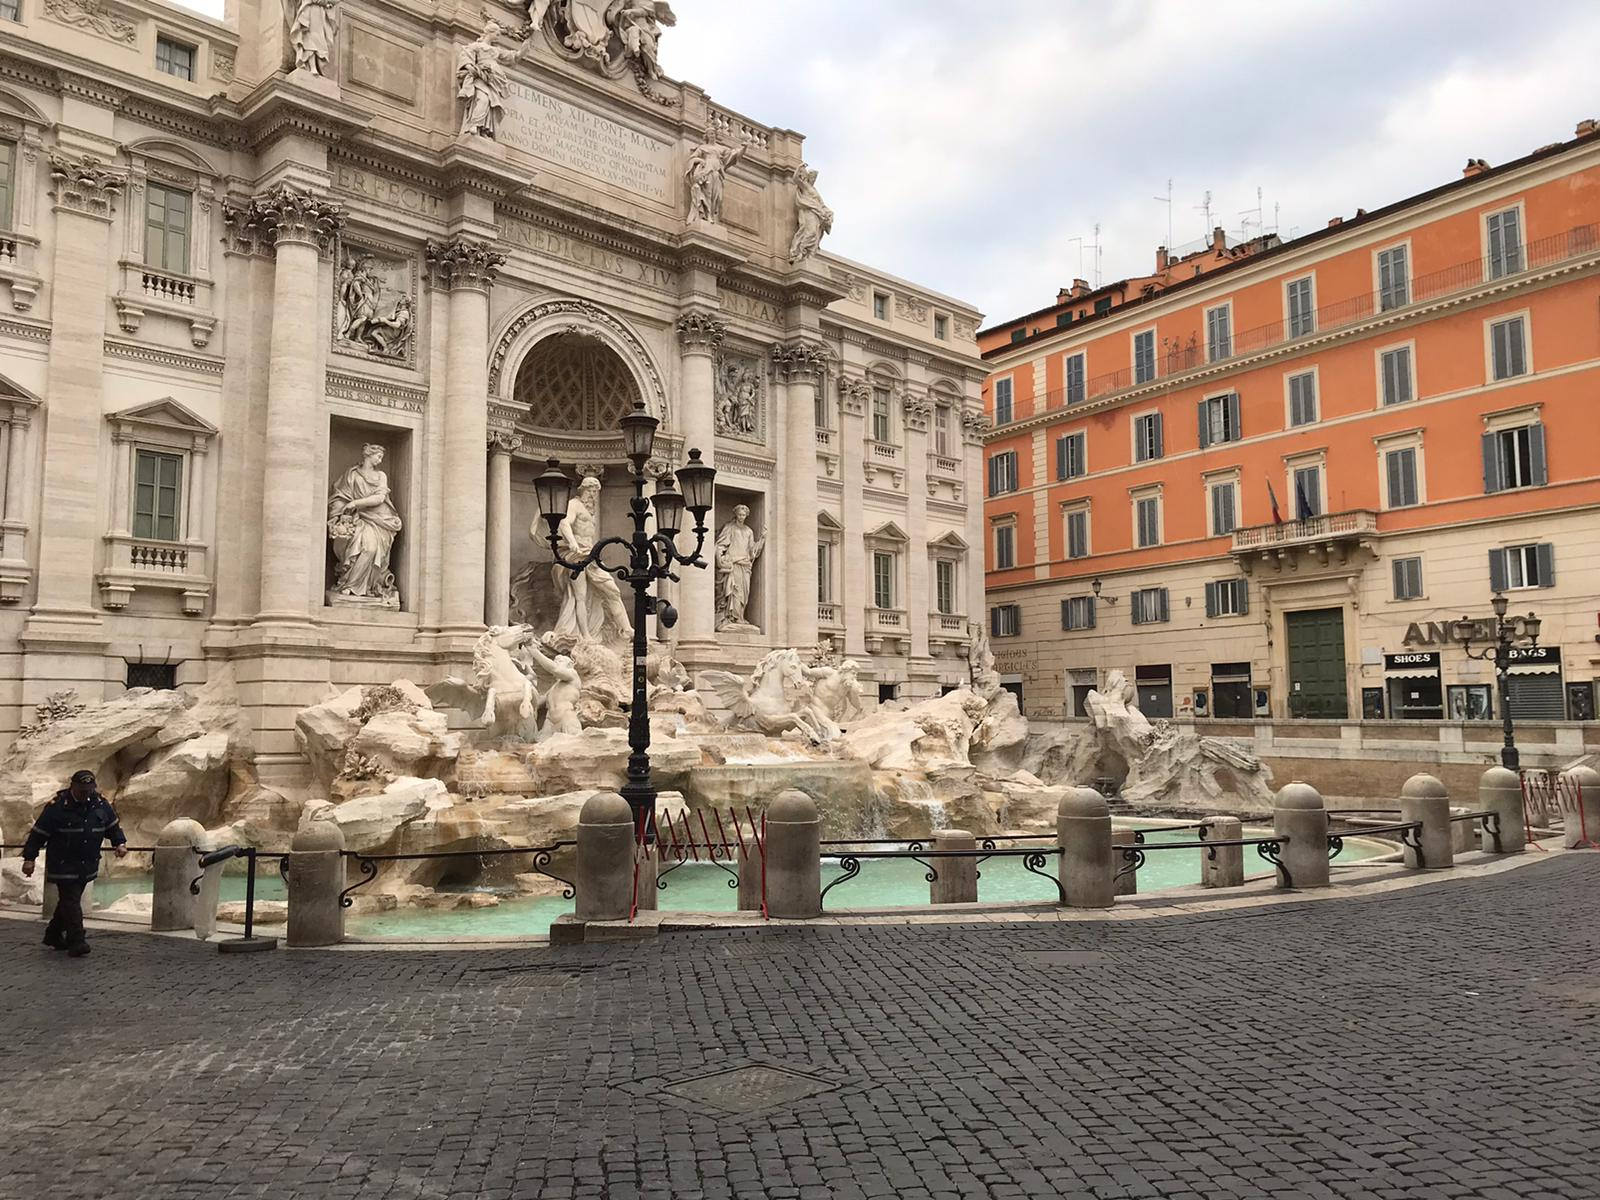 No lines here for a selfie in front of the Trevi Fountain